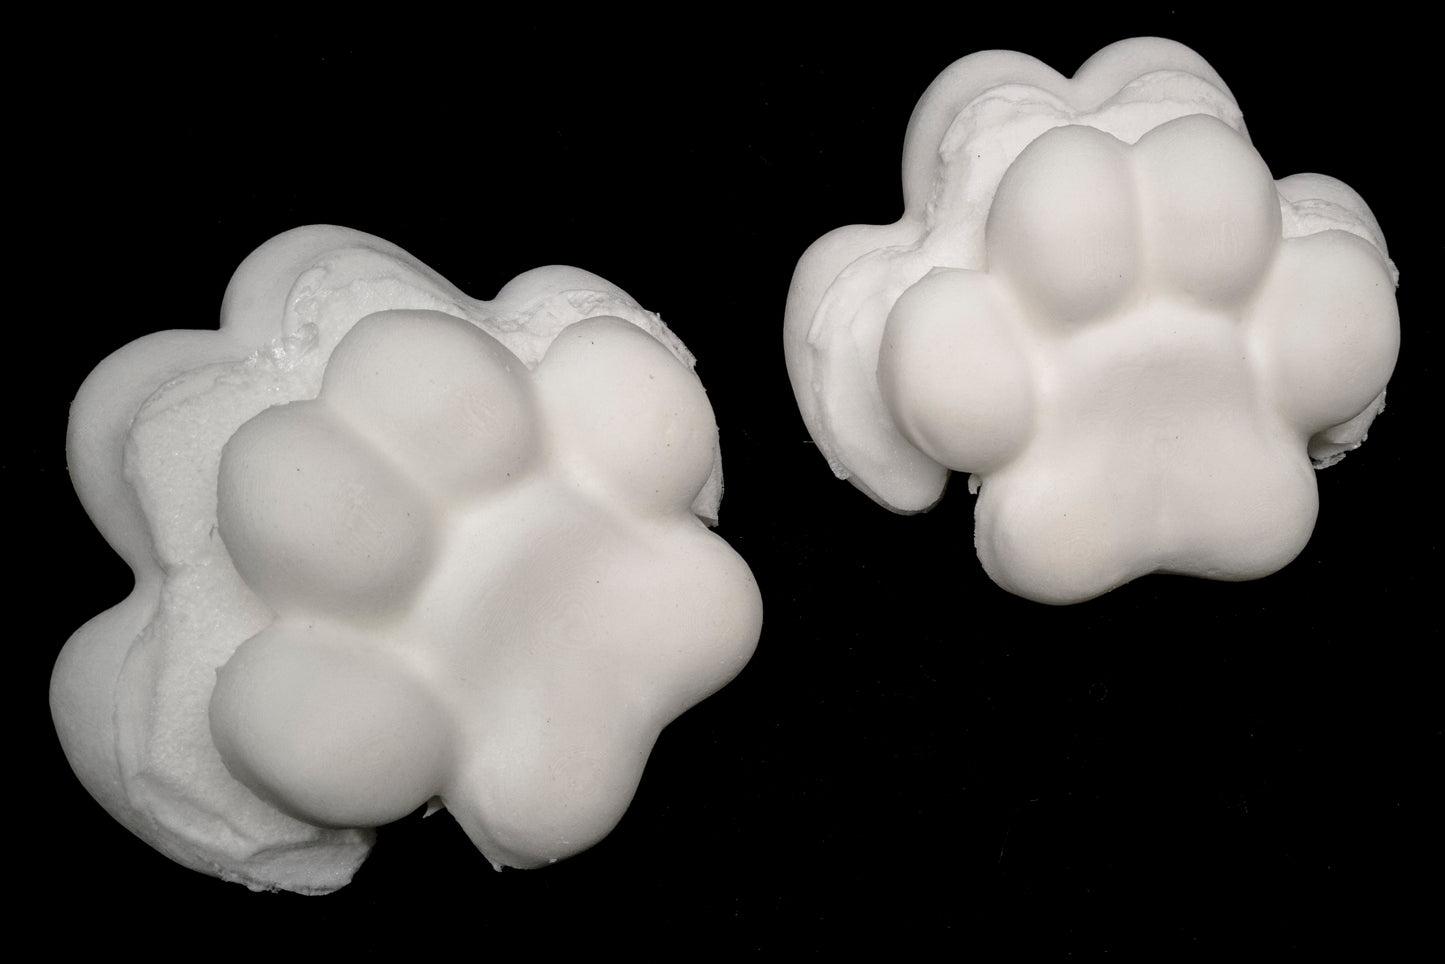 Large puffy paw pads for costumes, mascots and fursuits (One pair)